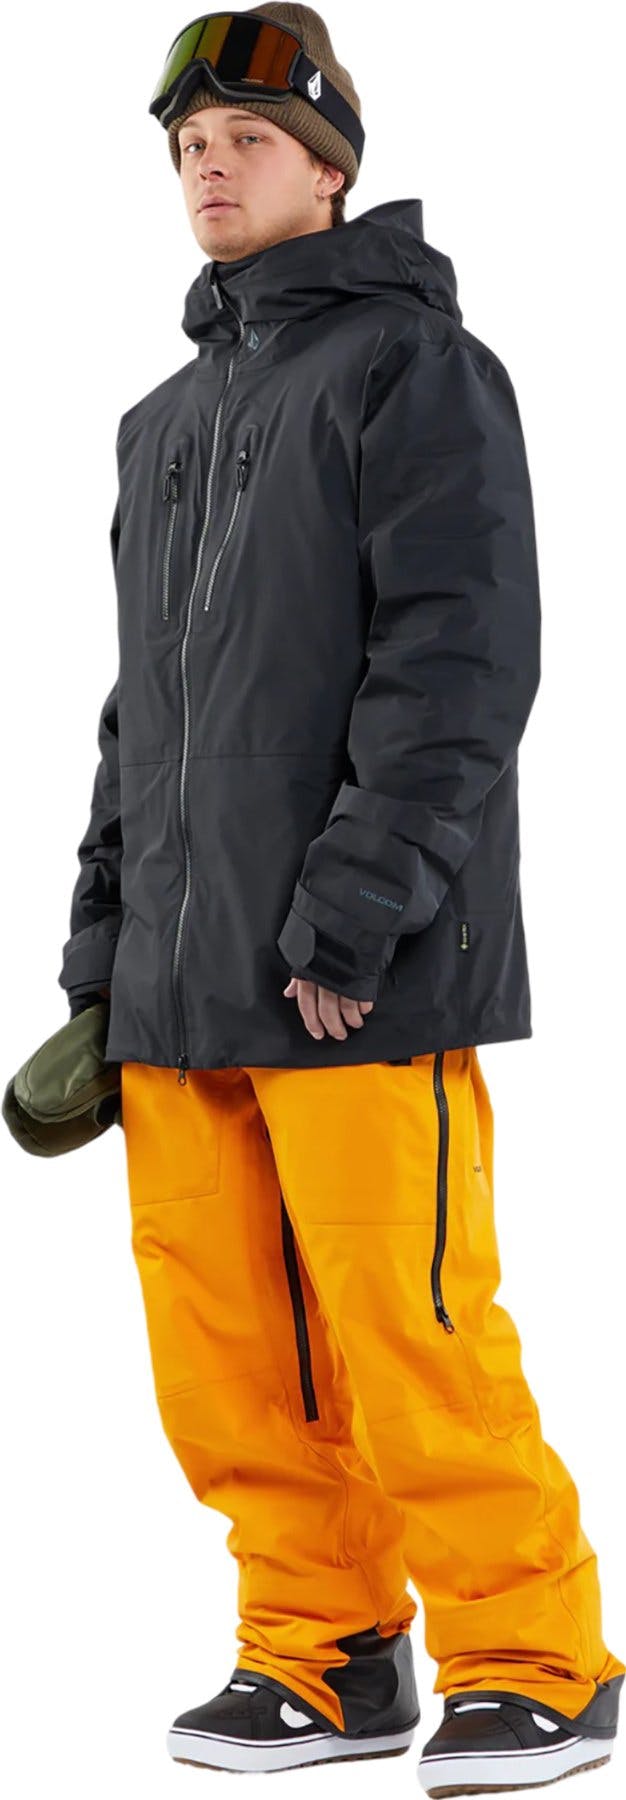 Product image for TDS Infrared GORE-TEX Jacket - Men's